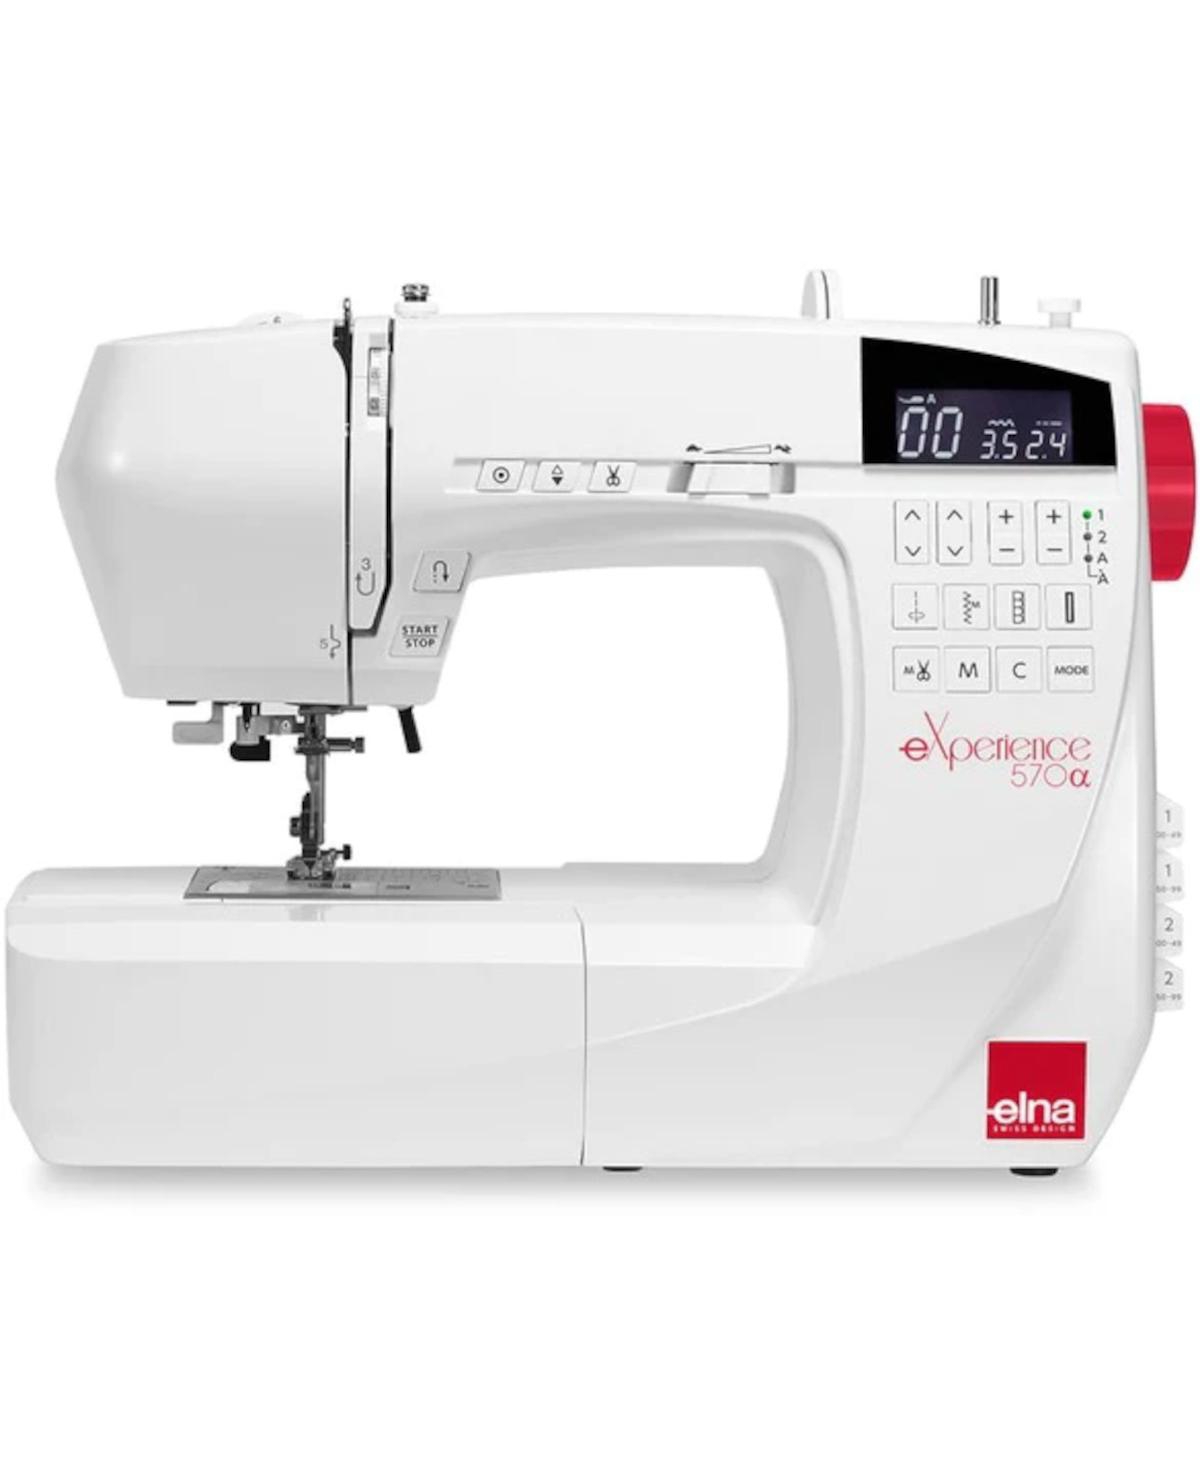 eXperience 570A Sewing Machine - White